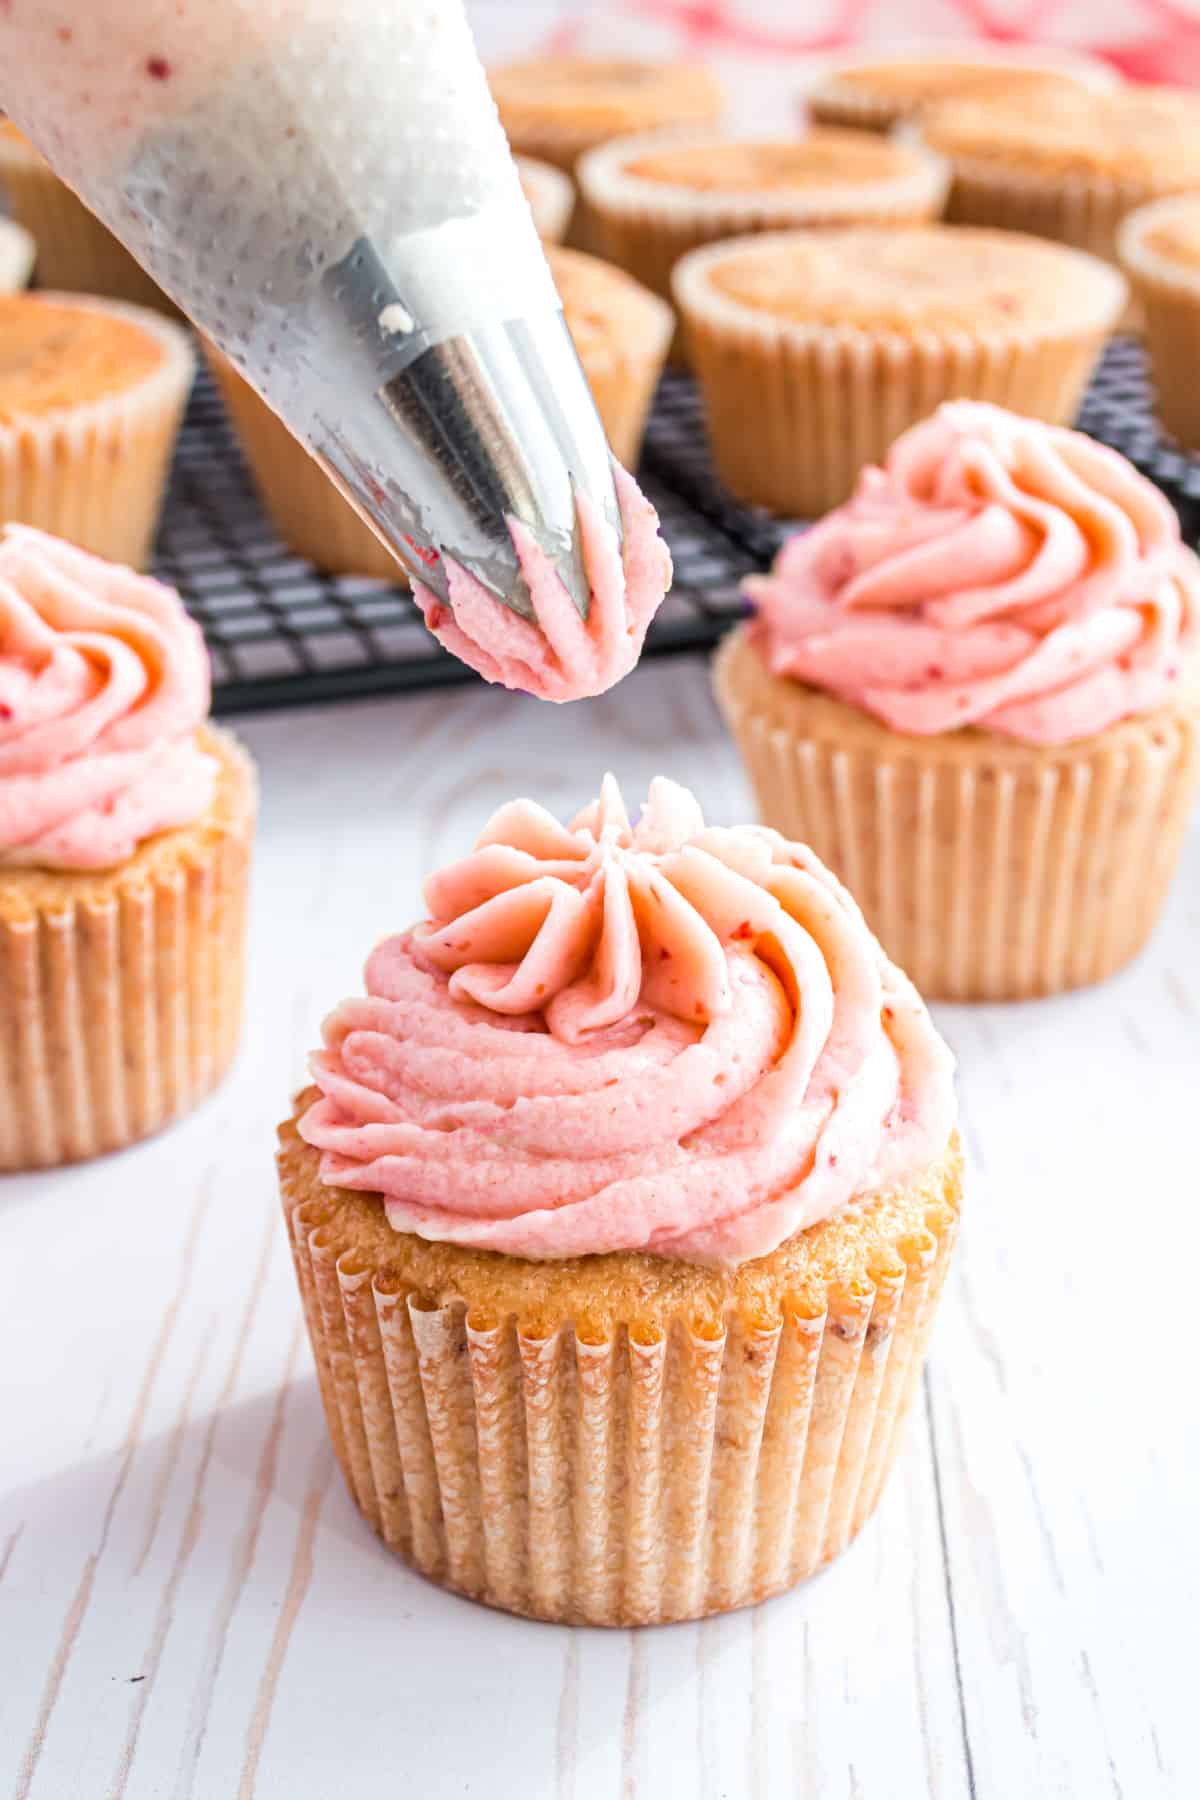 Strawberry cupcakes with strawberry frosting being piped on top.